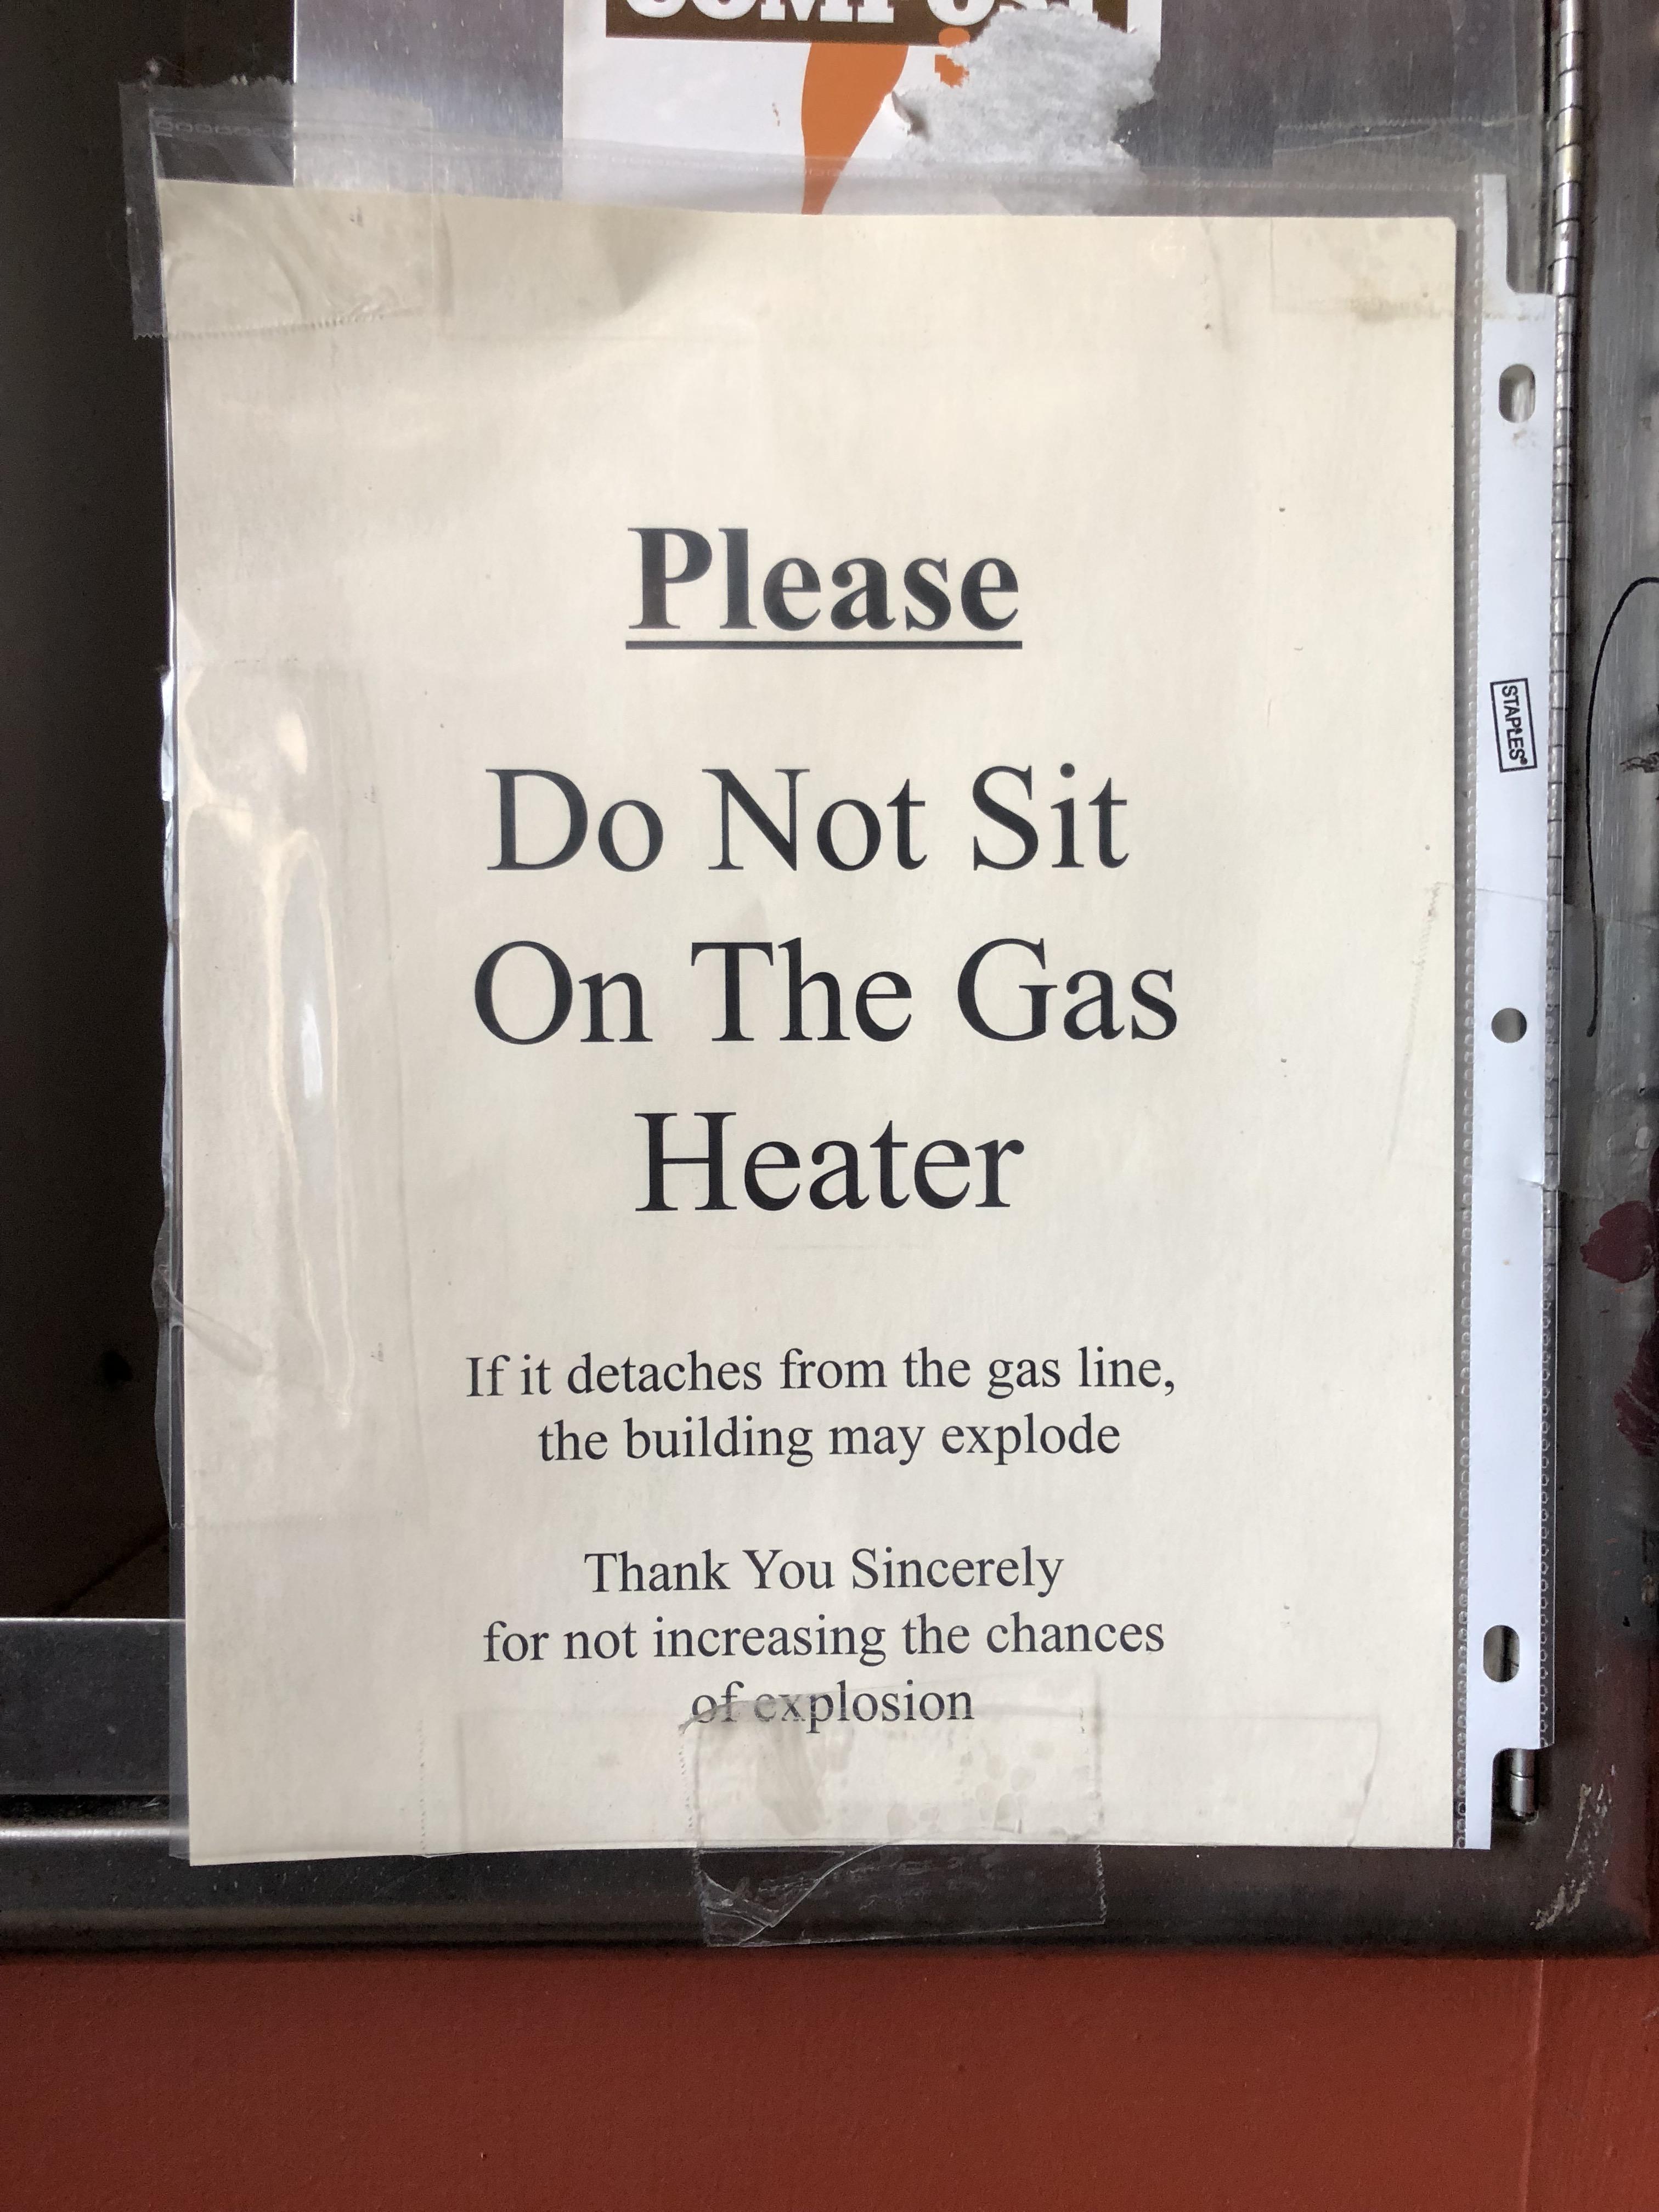 sign - Please Do Not Sit On The Gas Heater If it detaches from the gas line, the building may explode Thank You Sincerely for not increasing the chances of explosion